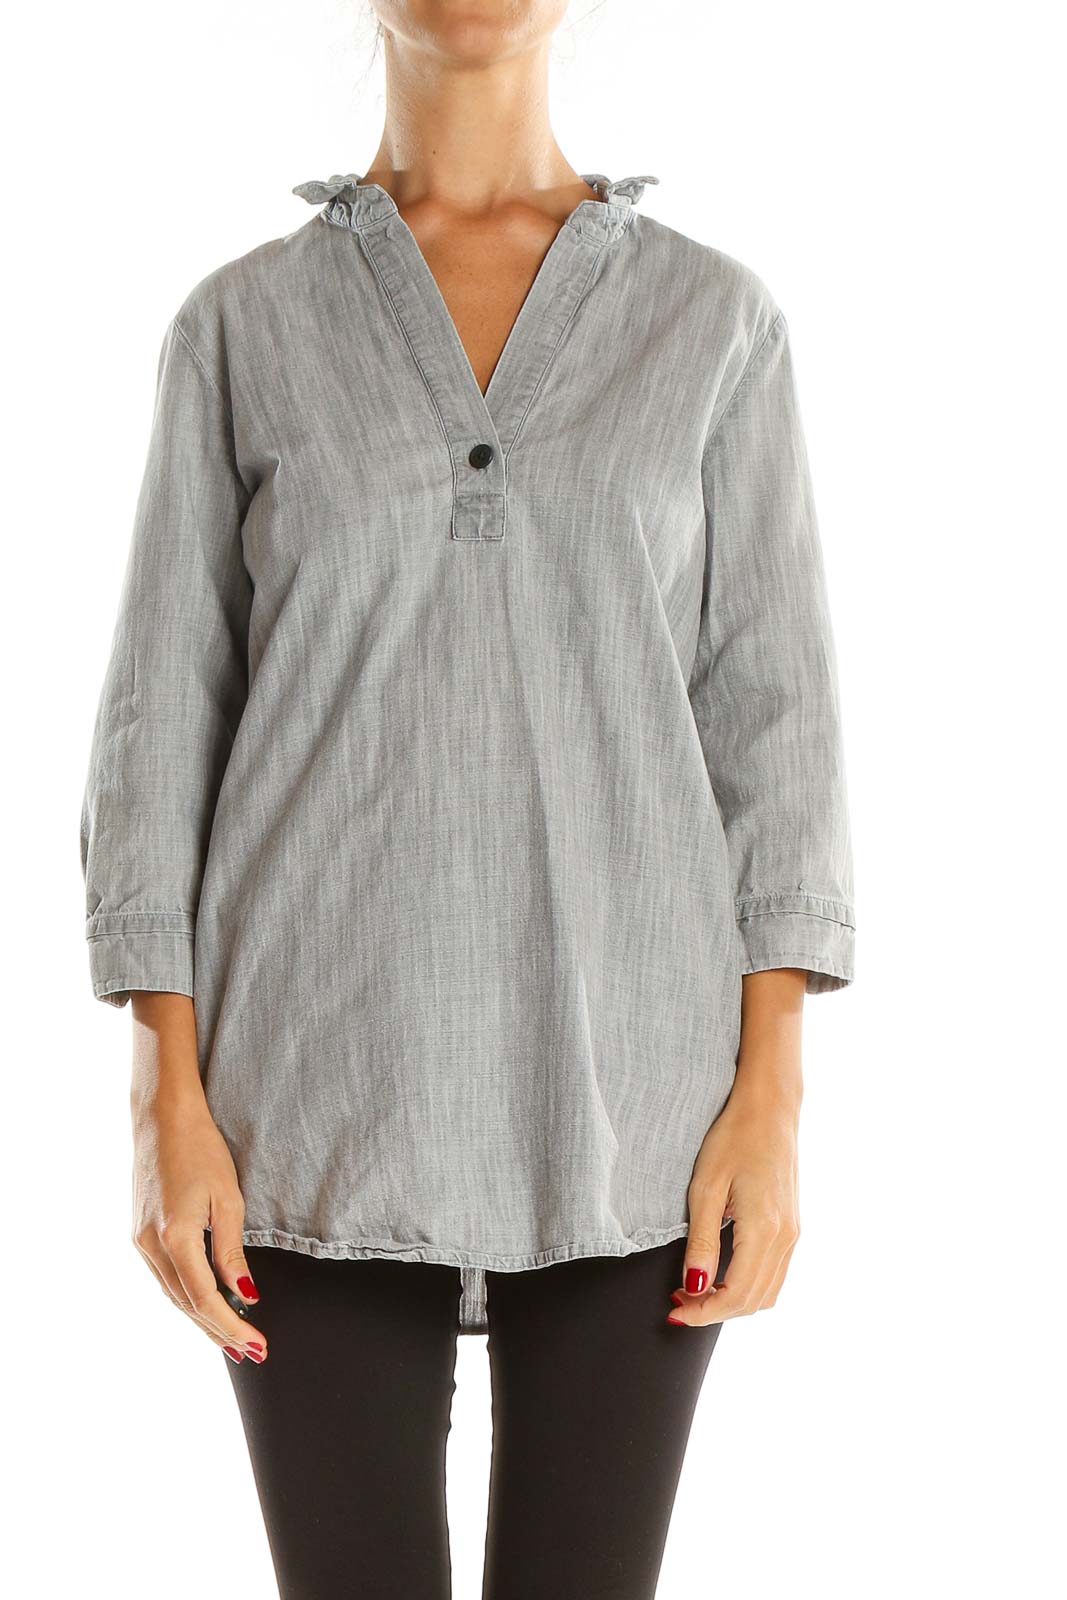 Gray All Day Wear Top Front